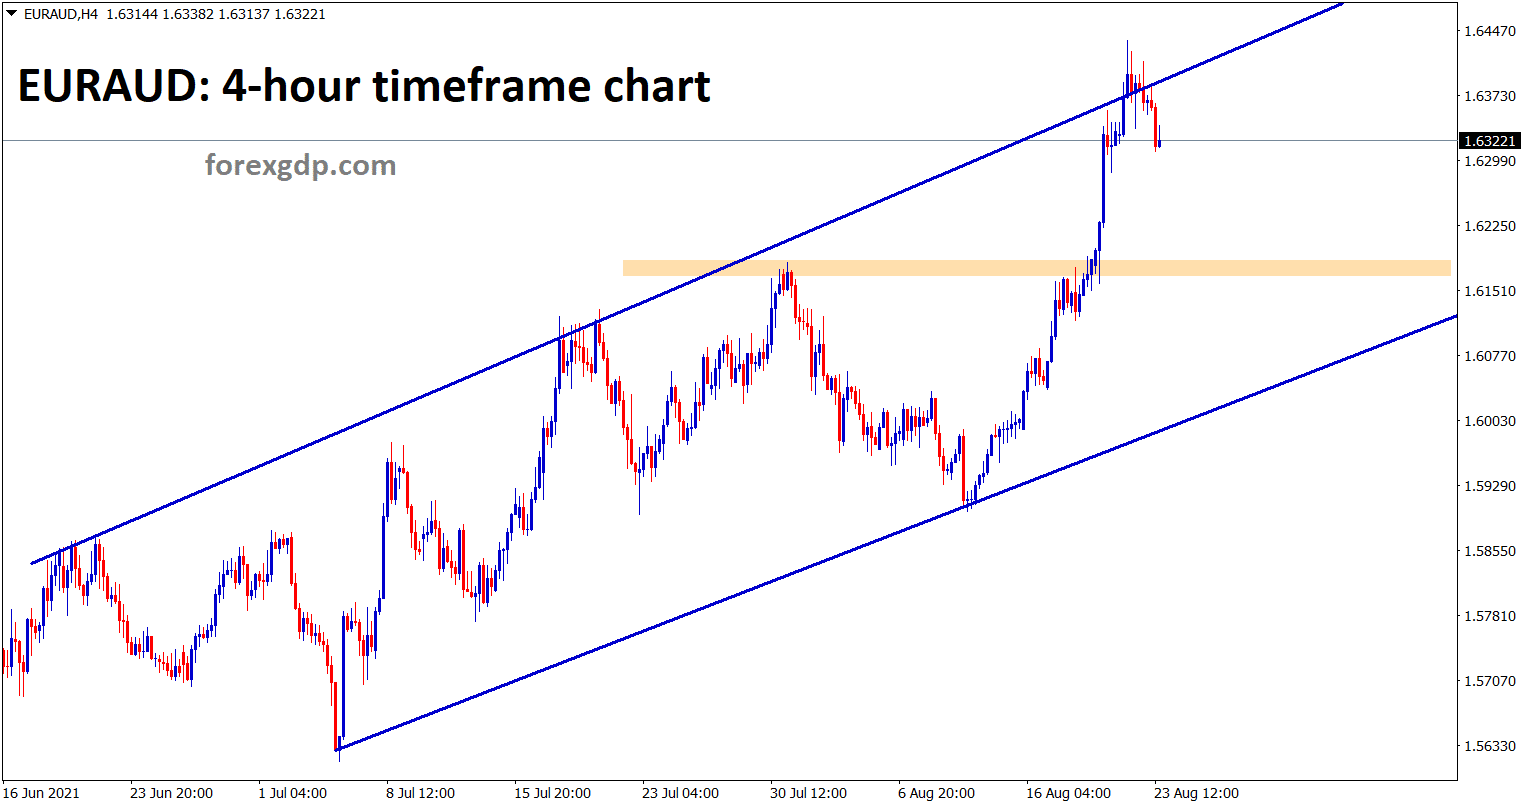 EURAUD hits the higher high of the uptrend line and now the correction is going on